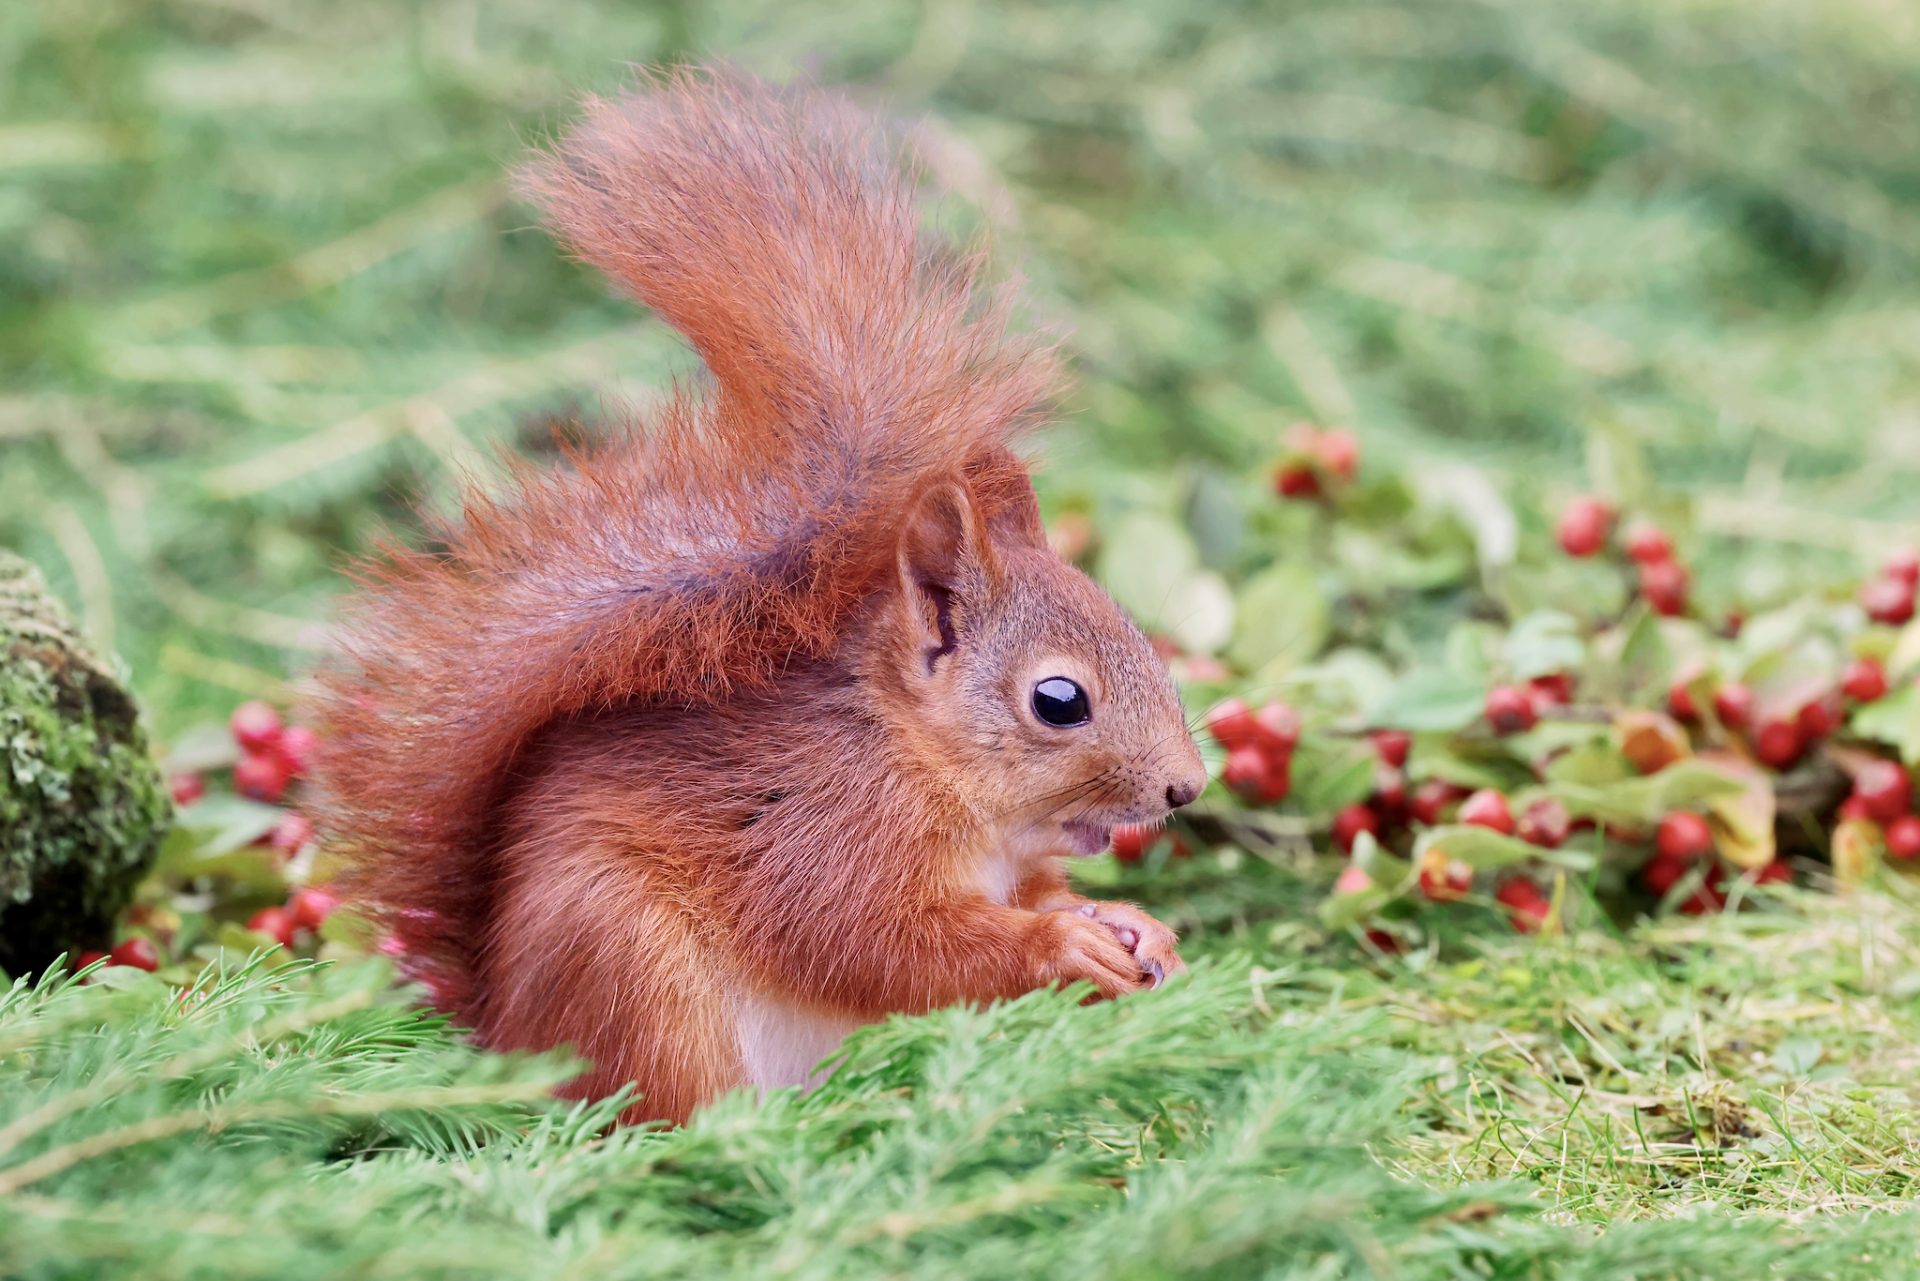 A young red squirrel